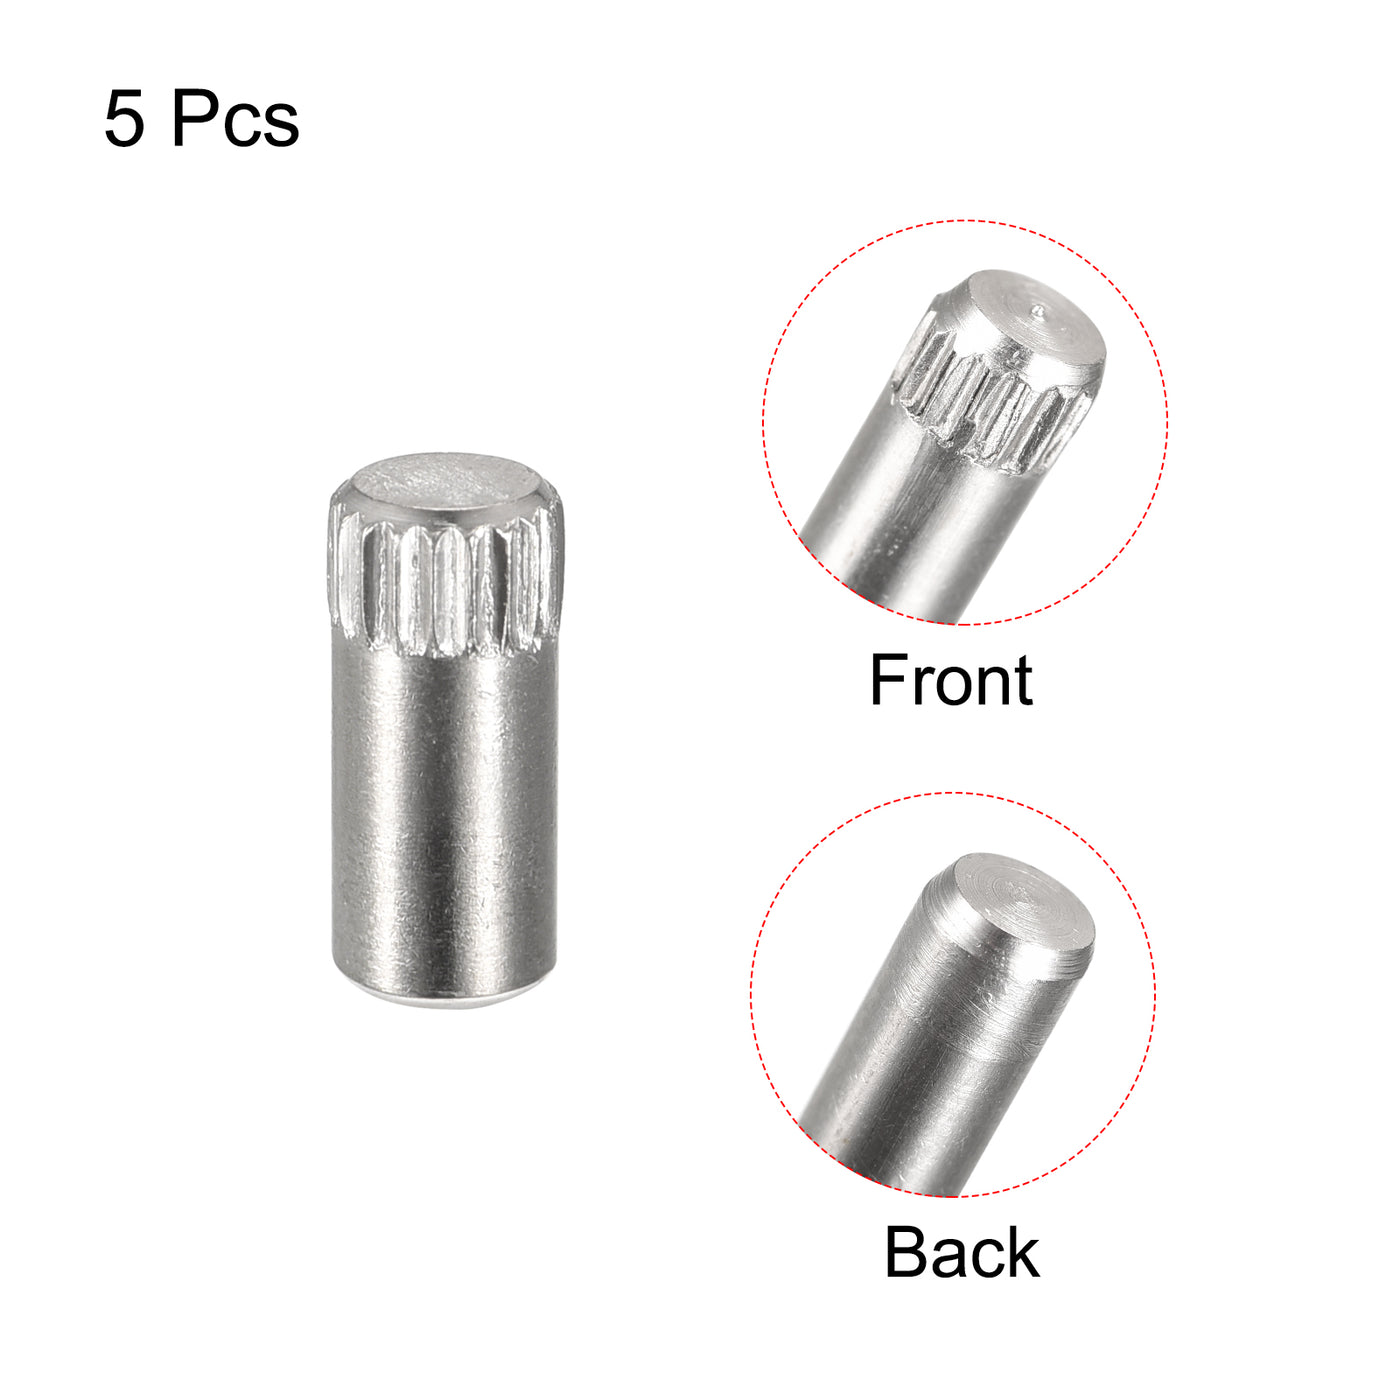 uxcell Uxcell 5x12mm 304 Stainless Steel Dowel Pins, 5Pcs Knurled Head Flat End Dowel Pin